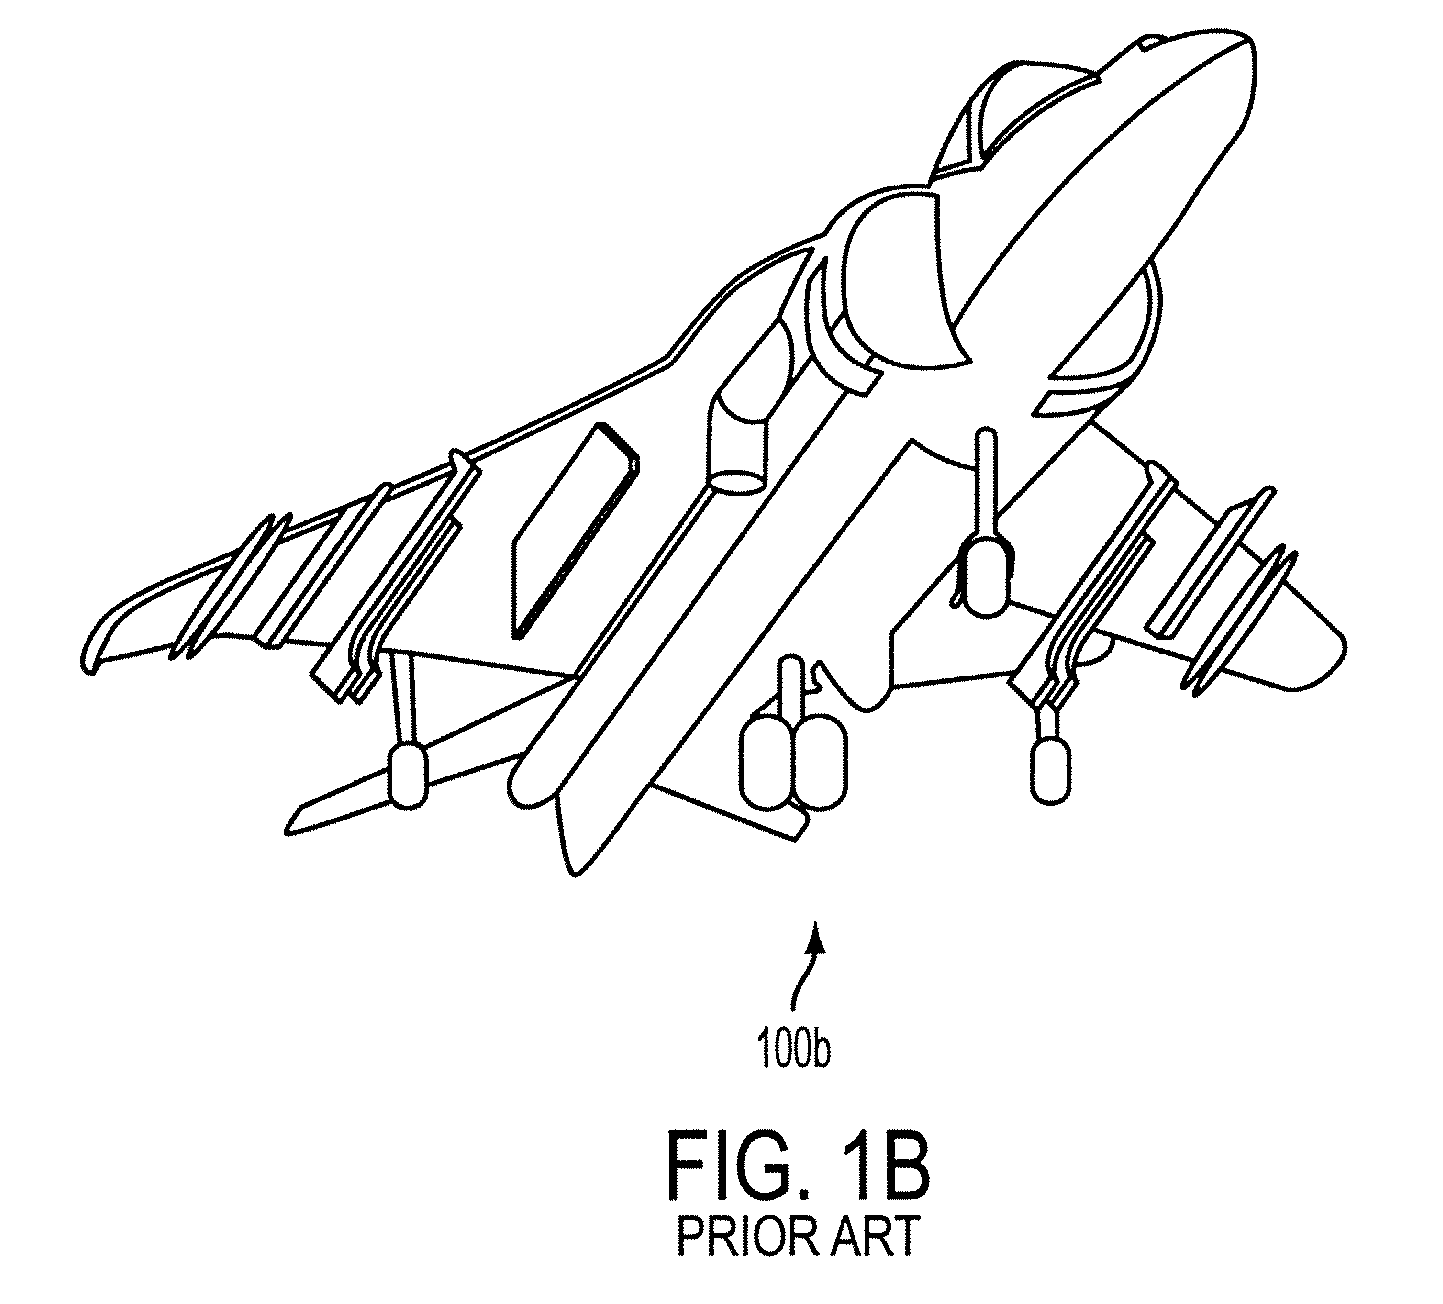 System and method for utilizing stored electrical energy for VTOL aircraft thrust enhancement and attitude control